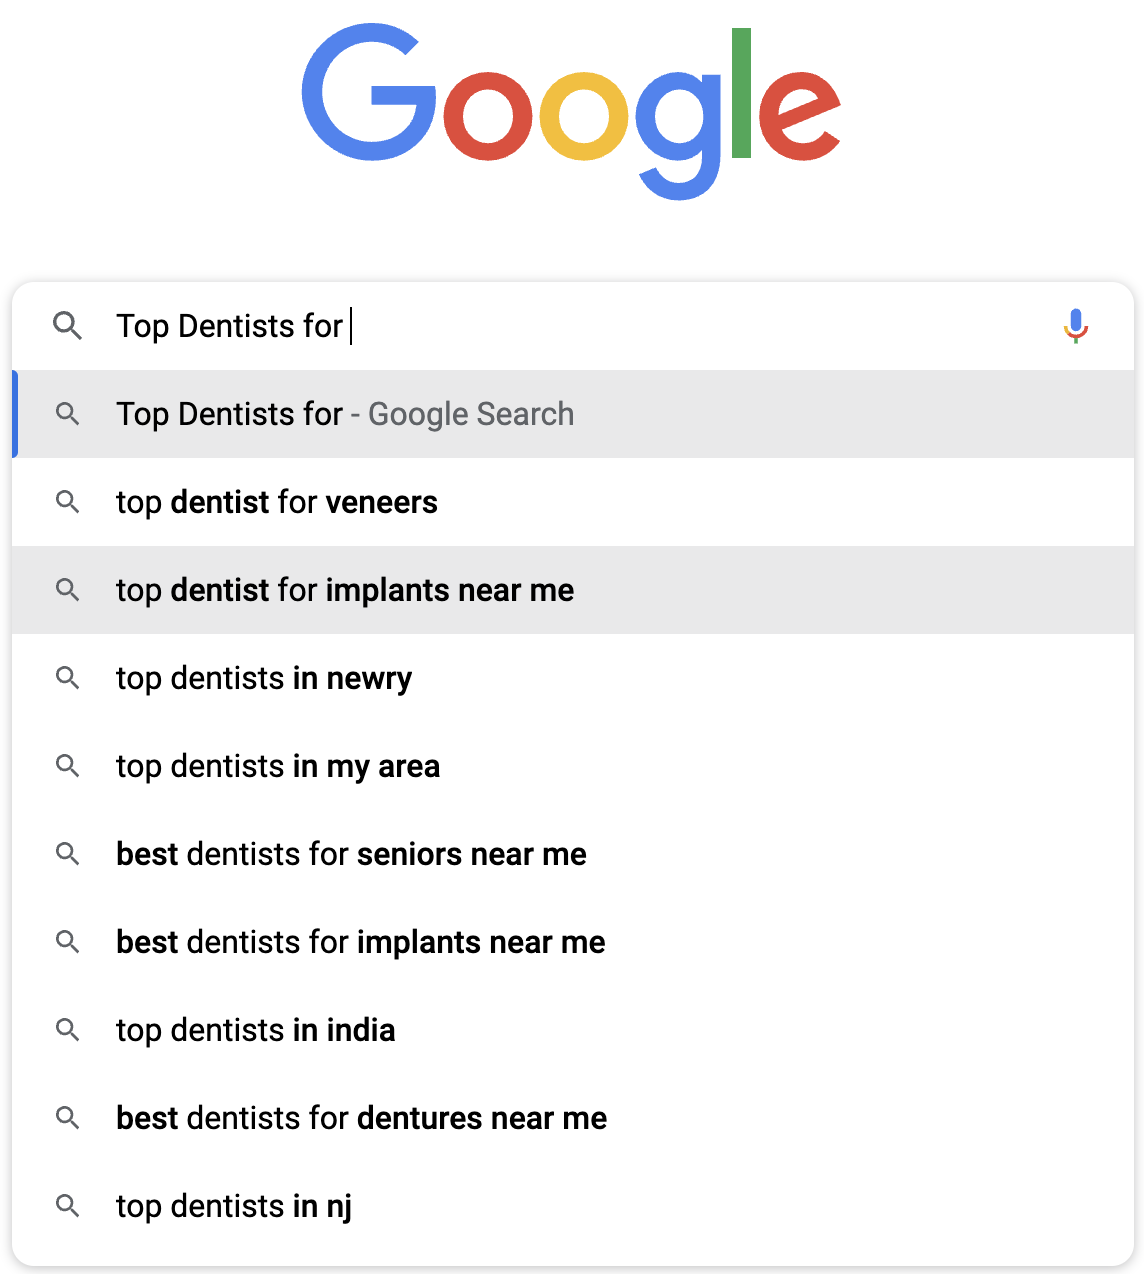 Top Dentist for